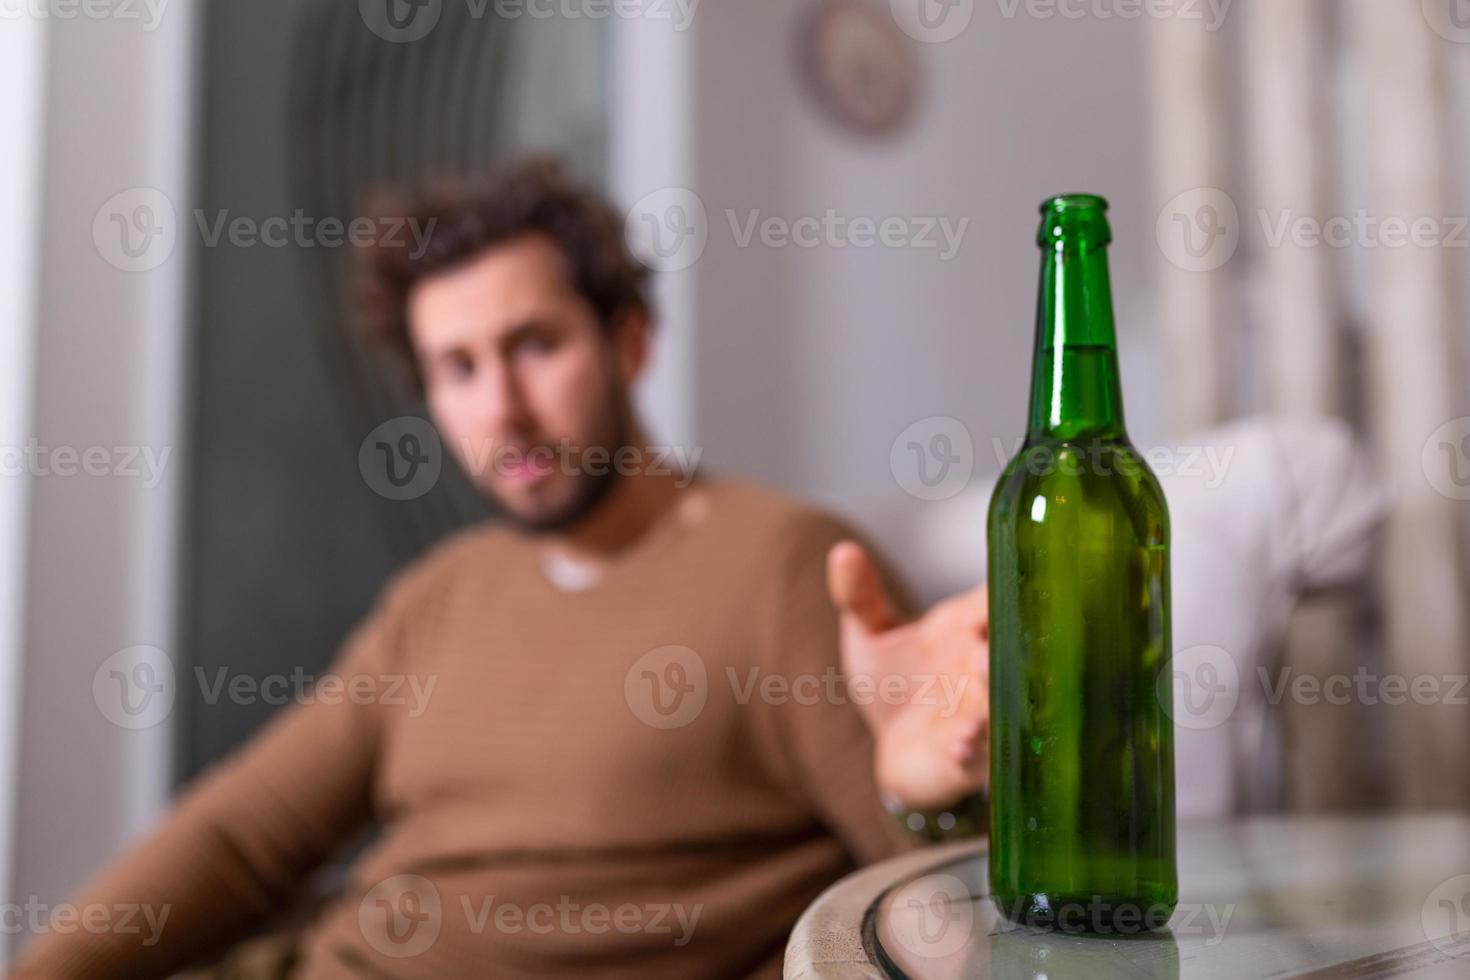 Alcoholic man reaching for bottle of beer, Man drinking home alone. alcoholism, alcohol addiction and people concept - male alcoholic with bottle of beer drinking at home alone photo